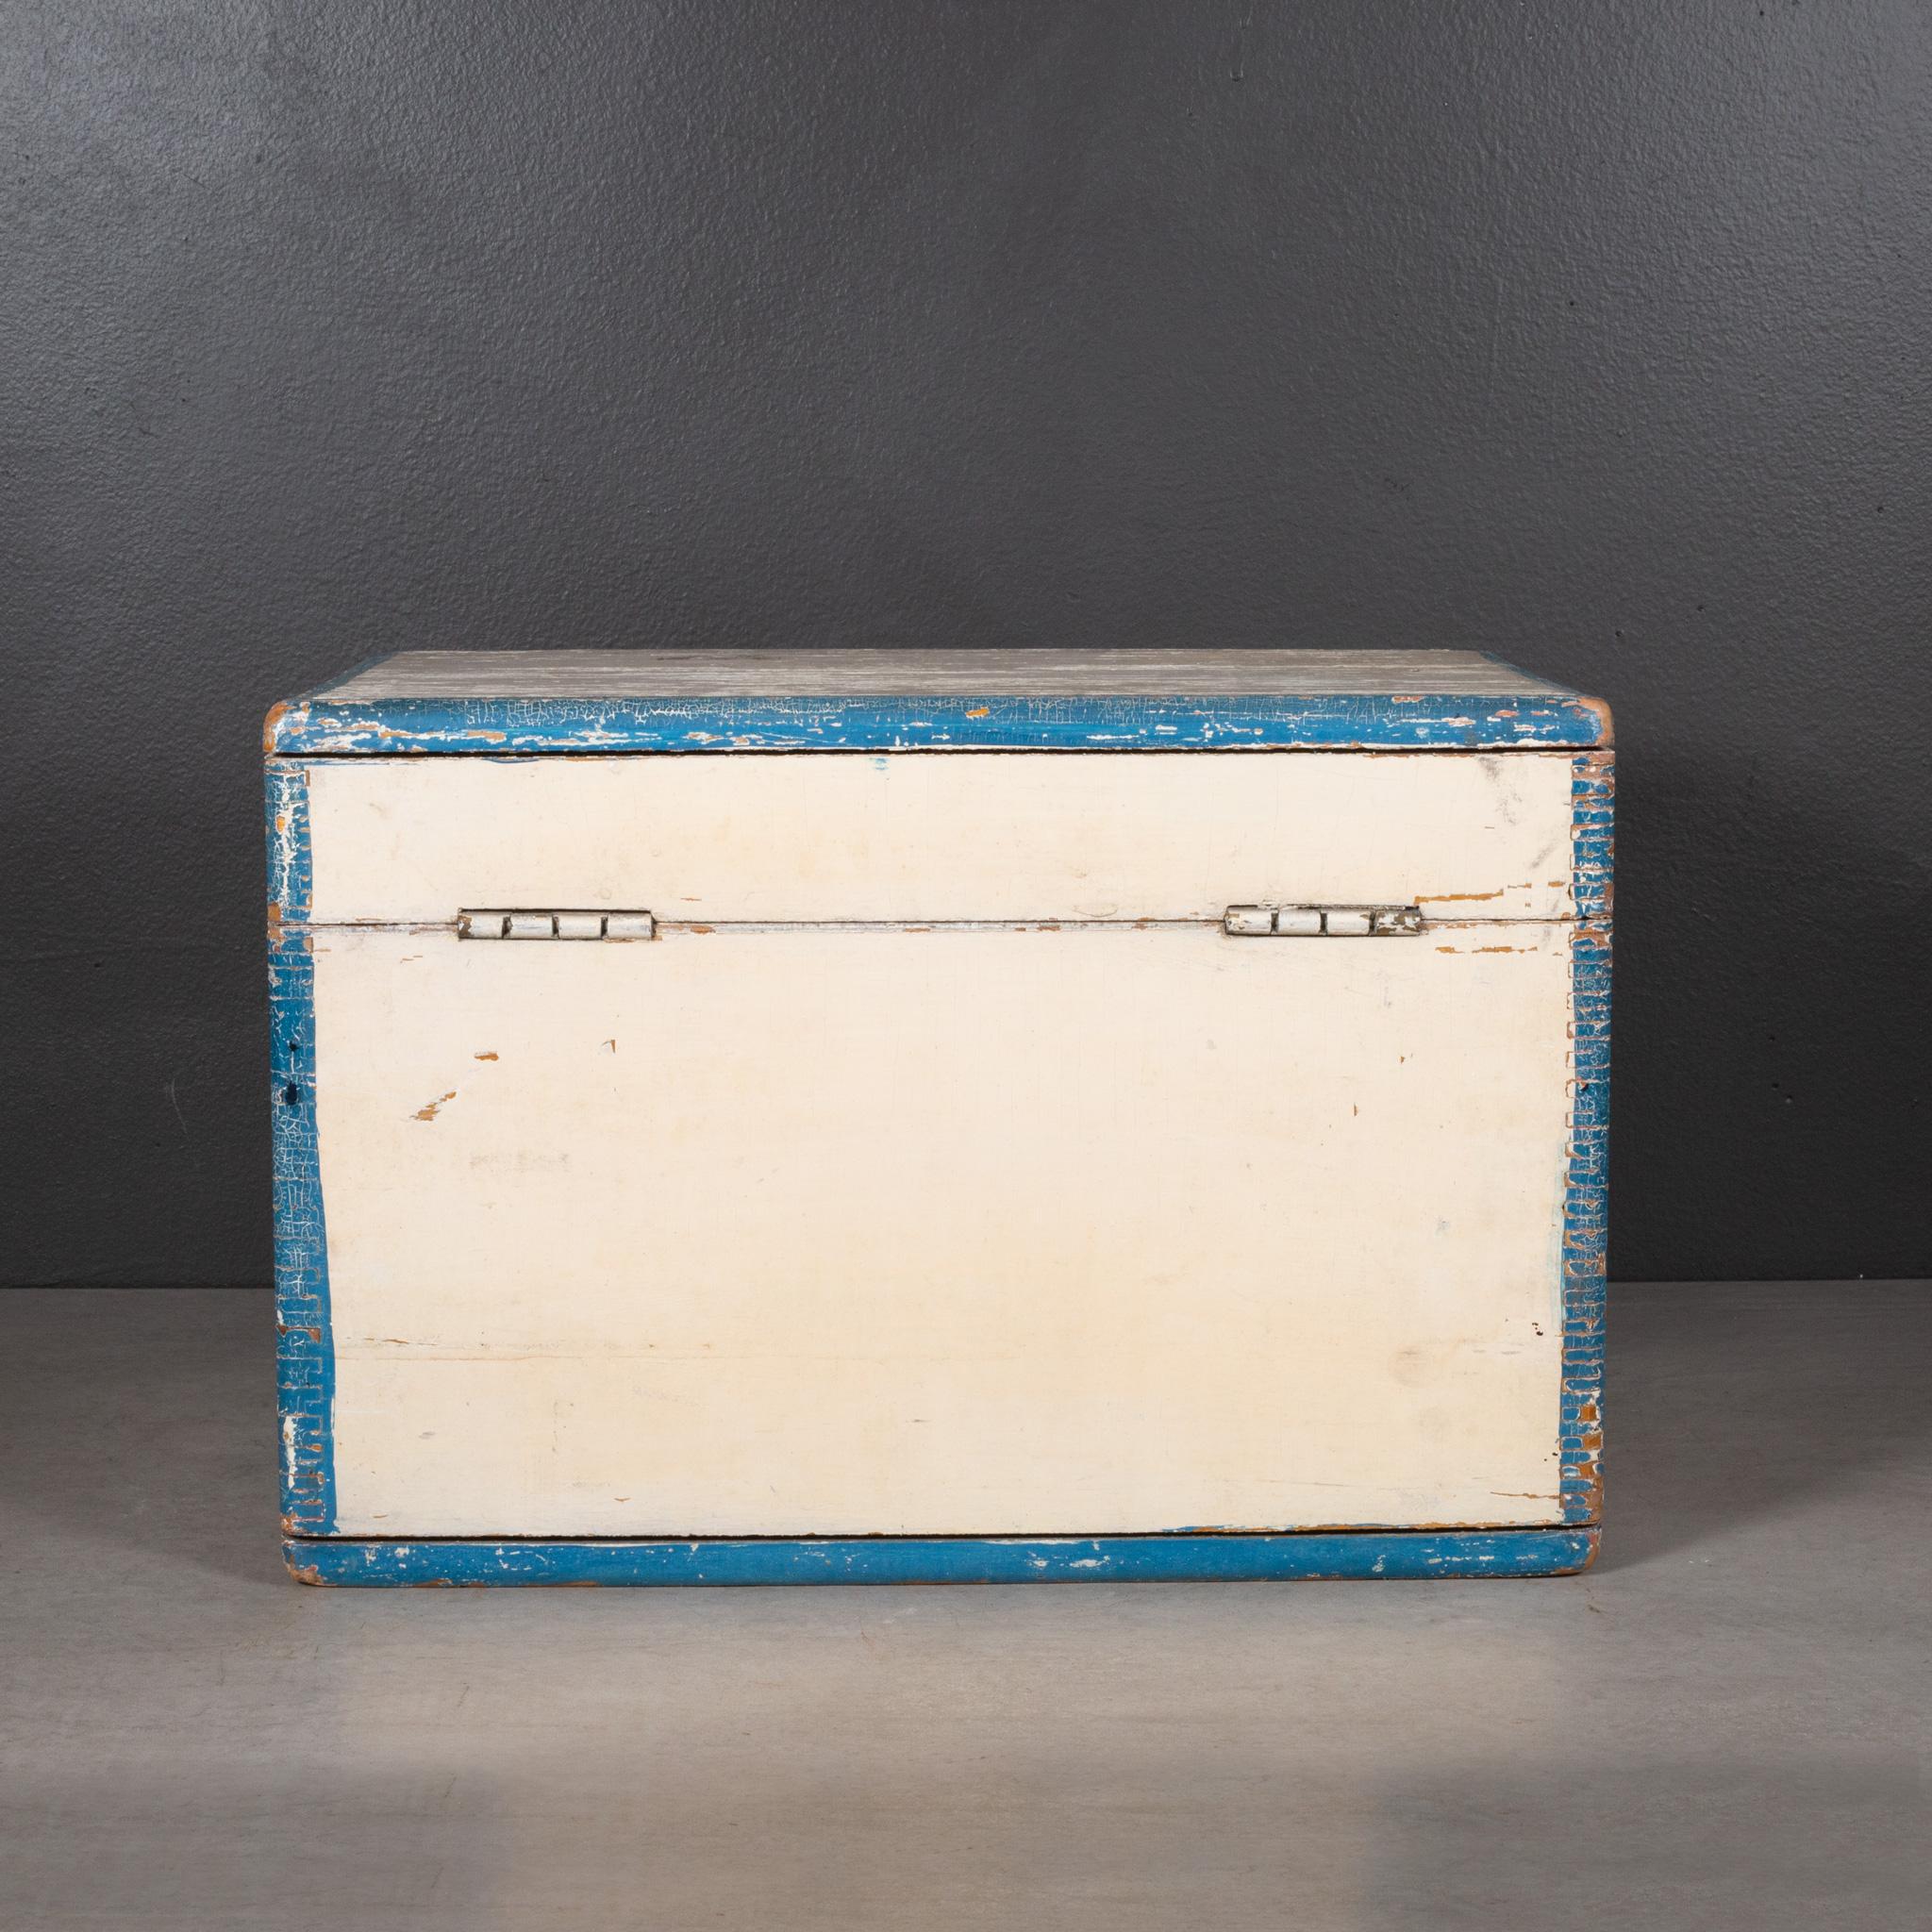 20th Century Handmade Monogrammed Wooden Toolbox with Inner Tray c.1940 (FREE SHIPPING) For Sale